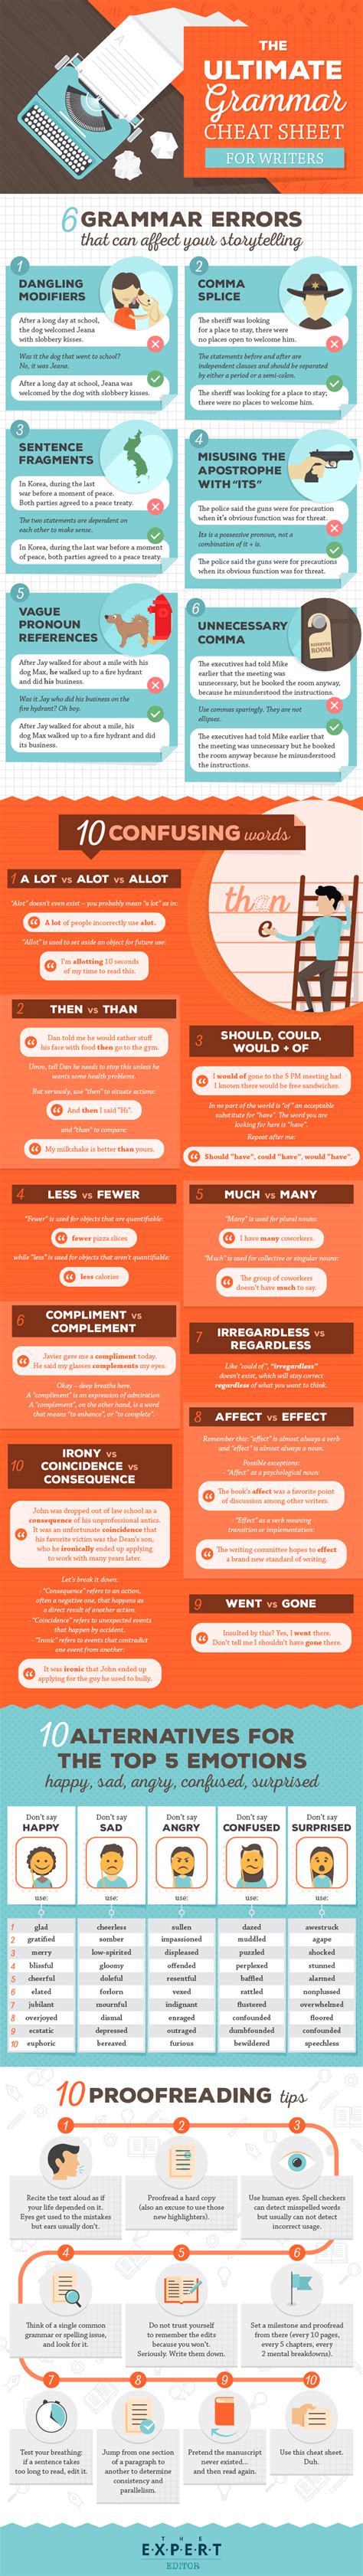 The Ultimate Grammar Cheat Sheet For Writers Infographic The Expert